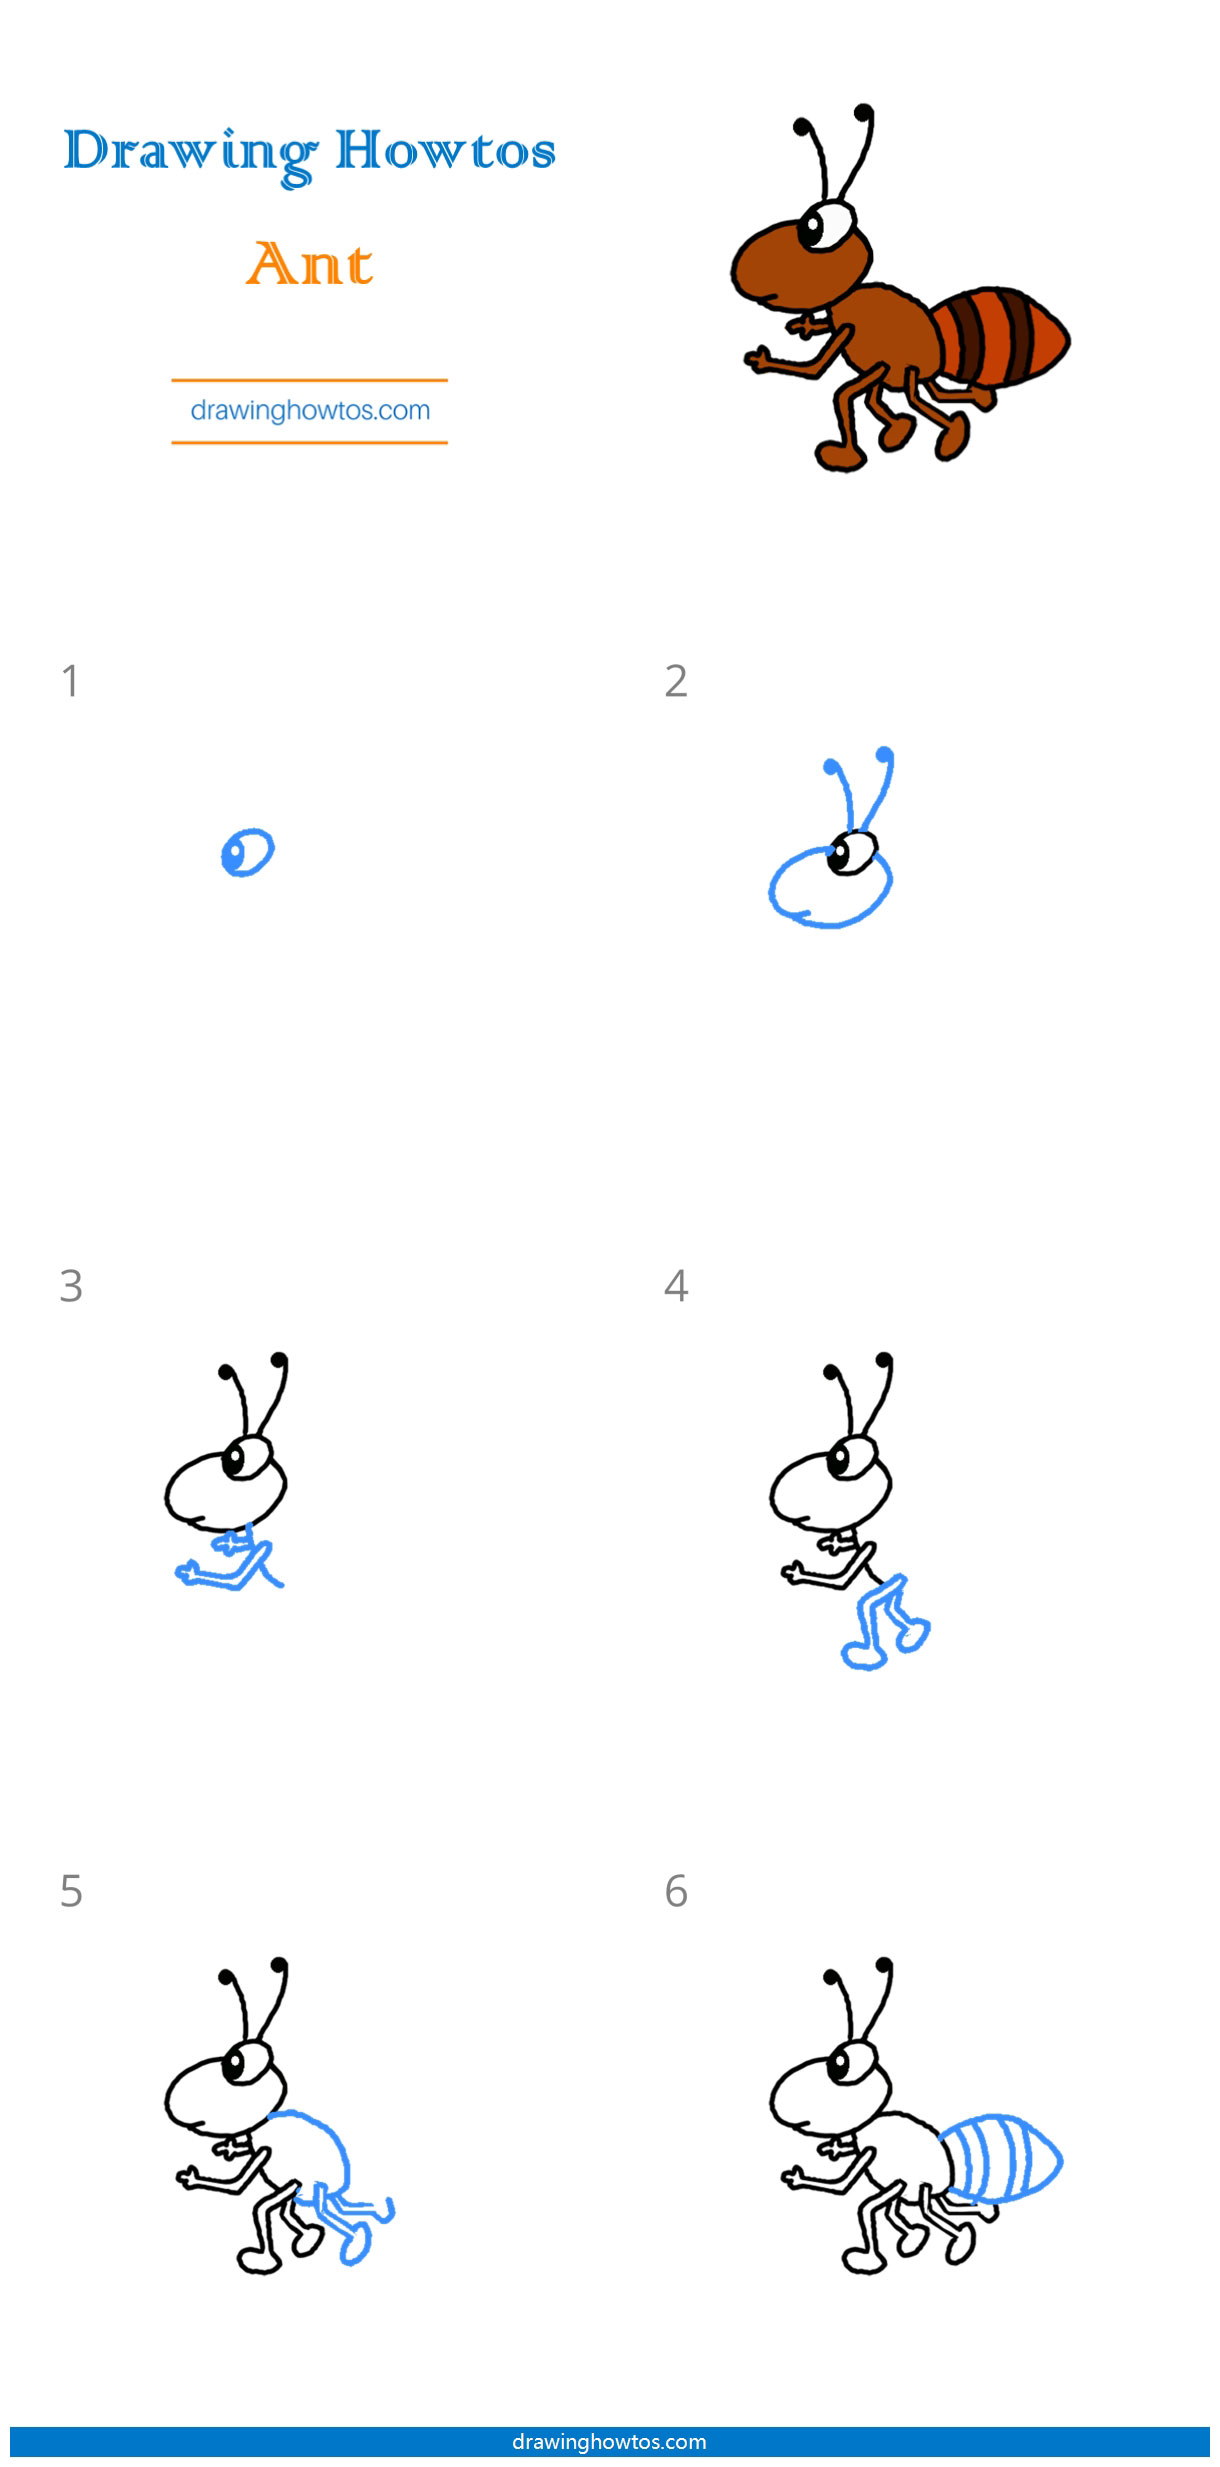 How to Draw an Ant Step by Step